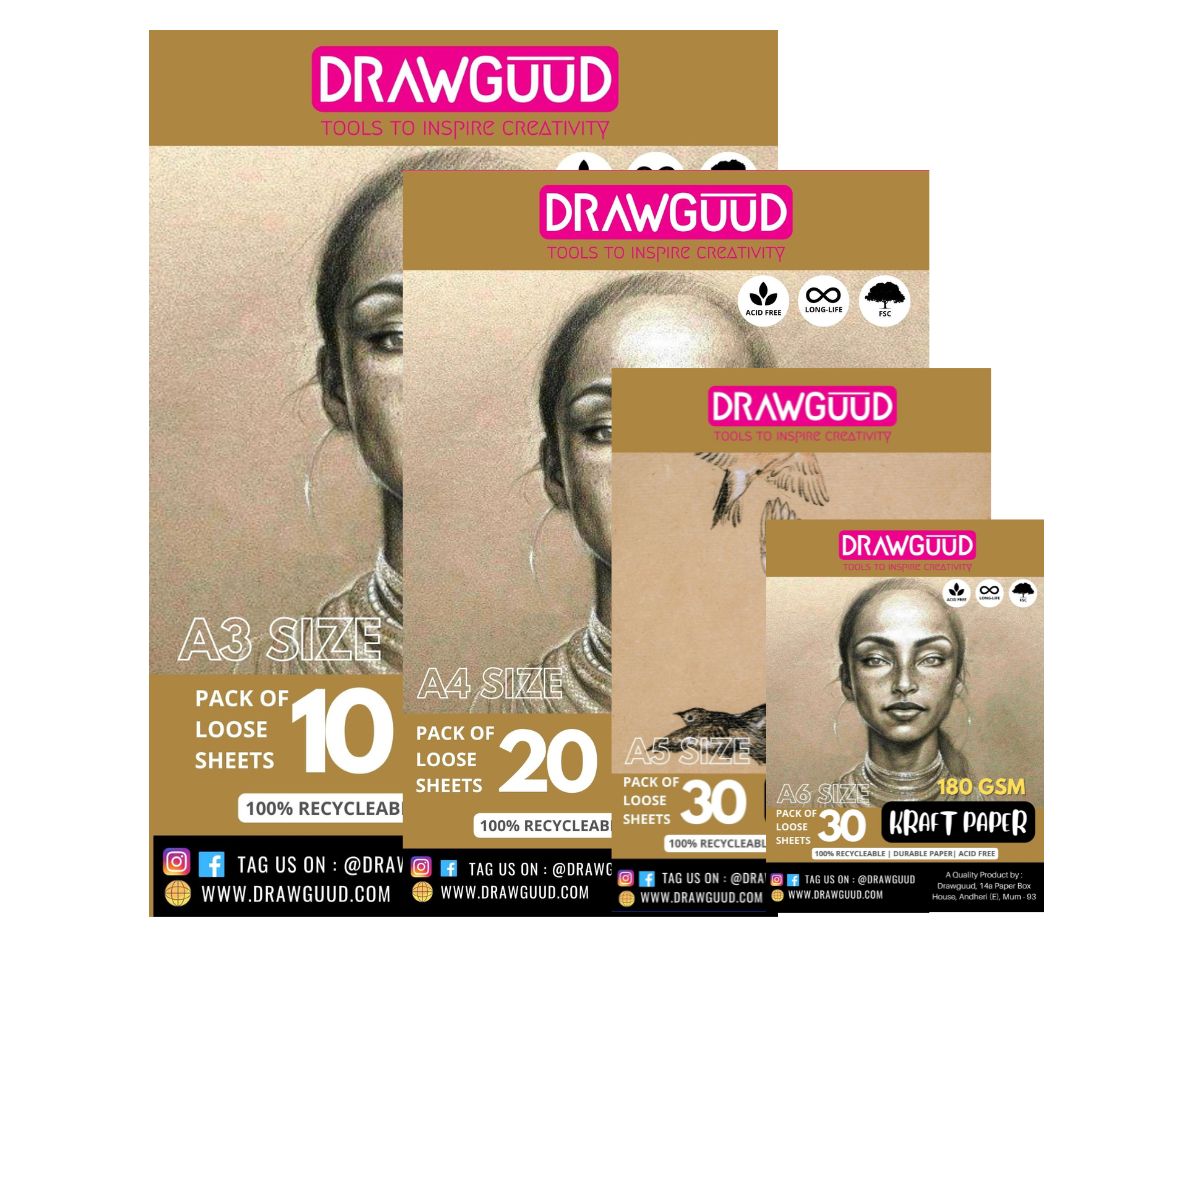 DRAWGUUD Pack of 2 180 GSM BLACK TEXTURE PAPER FOR PAINTING, LOOSE SHEETS